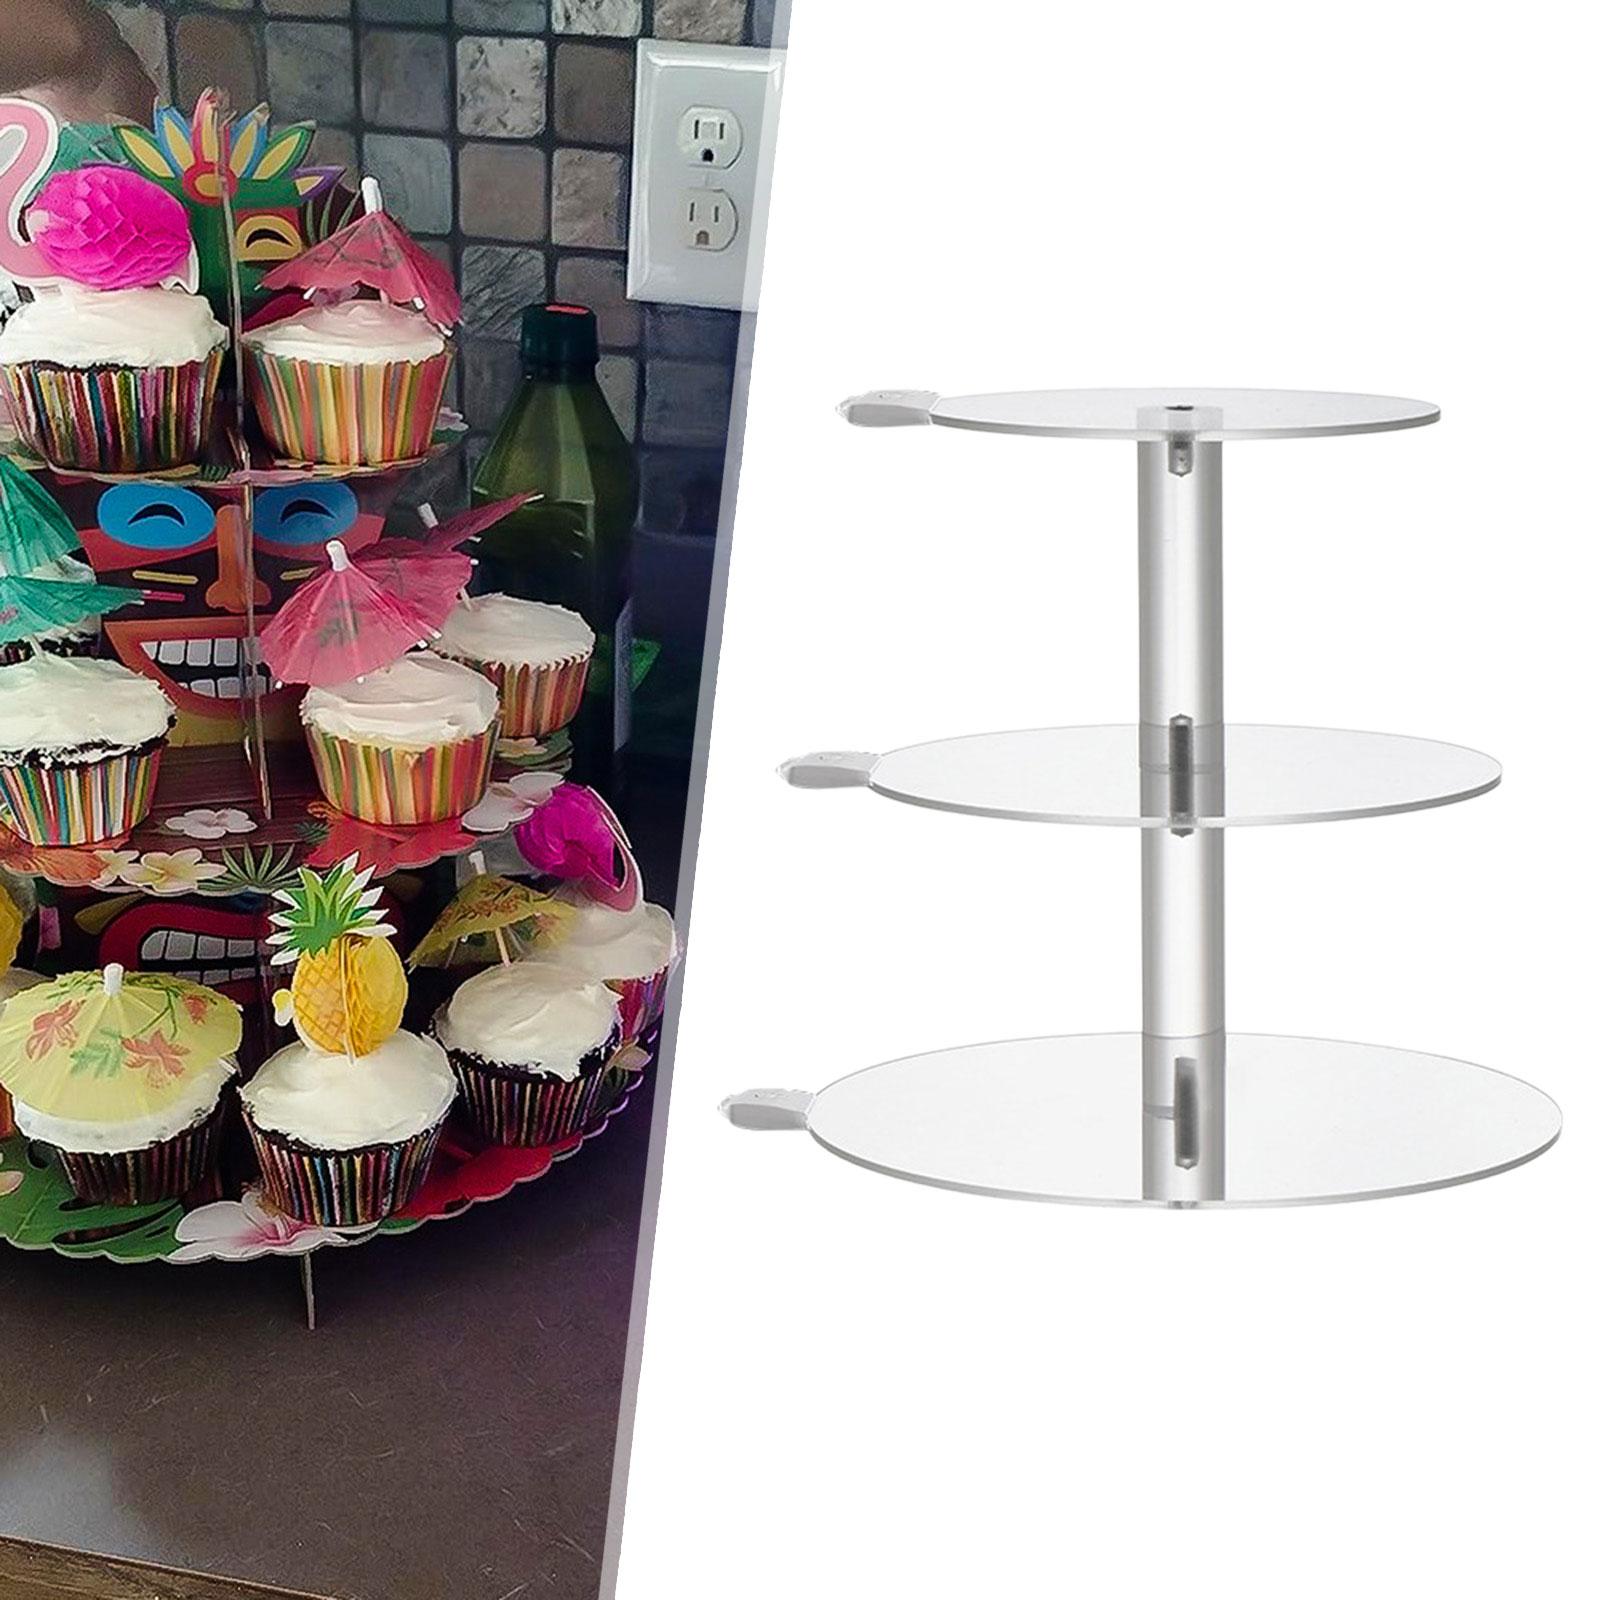 Cake Stand,Clear Acrylic Cupcake Stand with Light, Dessert Display Riser,3  Tier Cupcake Holder Cupcake Tier Stand for Anniversary, Graduation round 